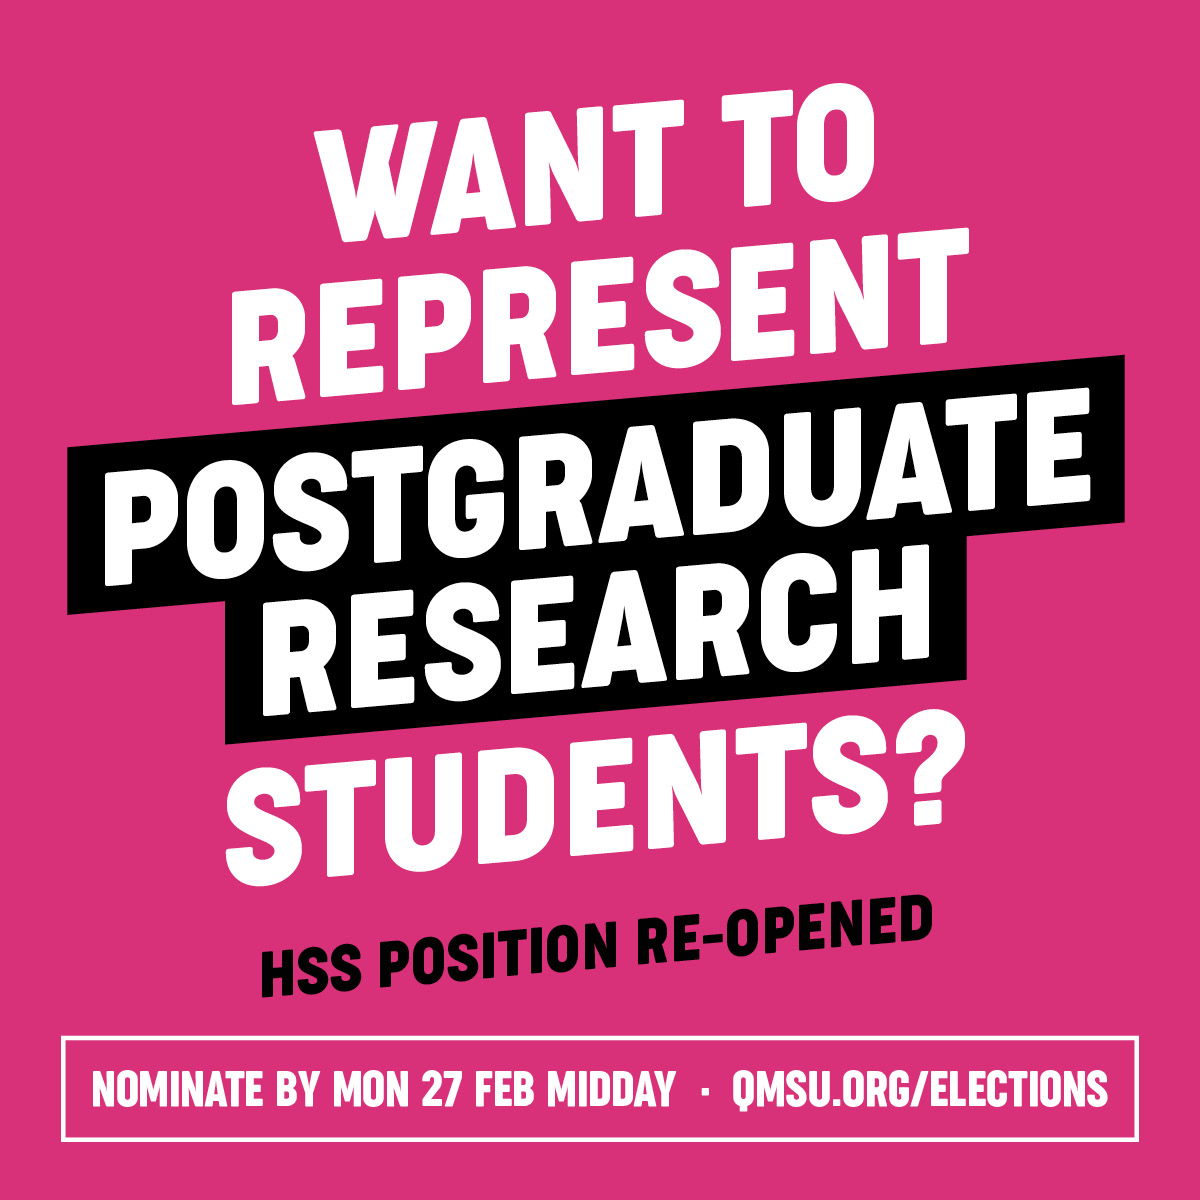 Re-open Nominations are now open for the Postgraduate Research Representative (HSS). Nominate by 27 Feb 2023 online www.qmsu.org/elections/nominate